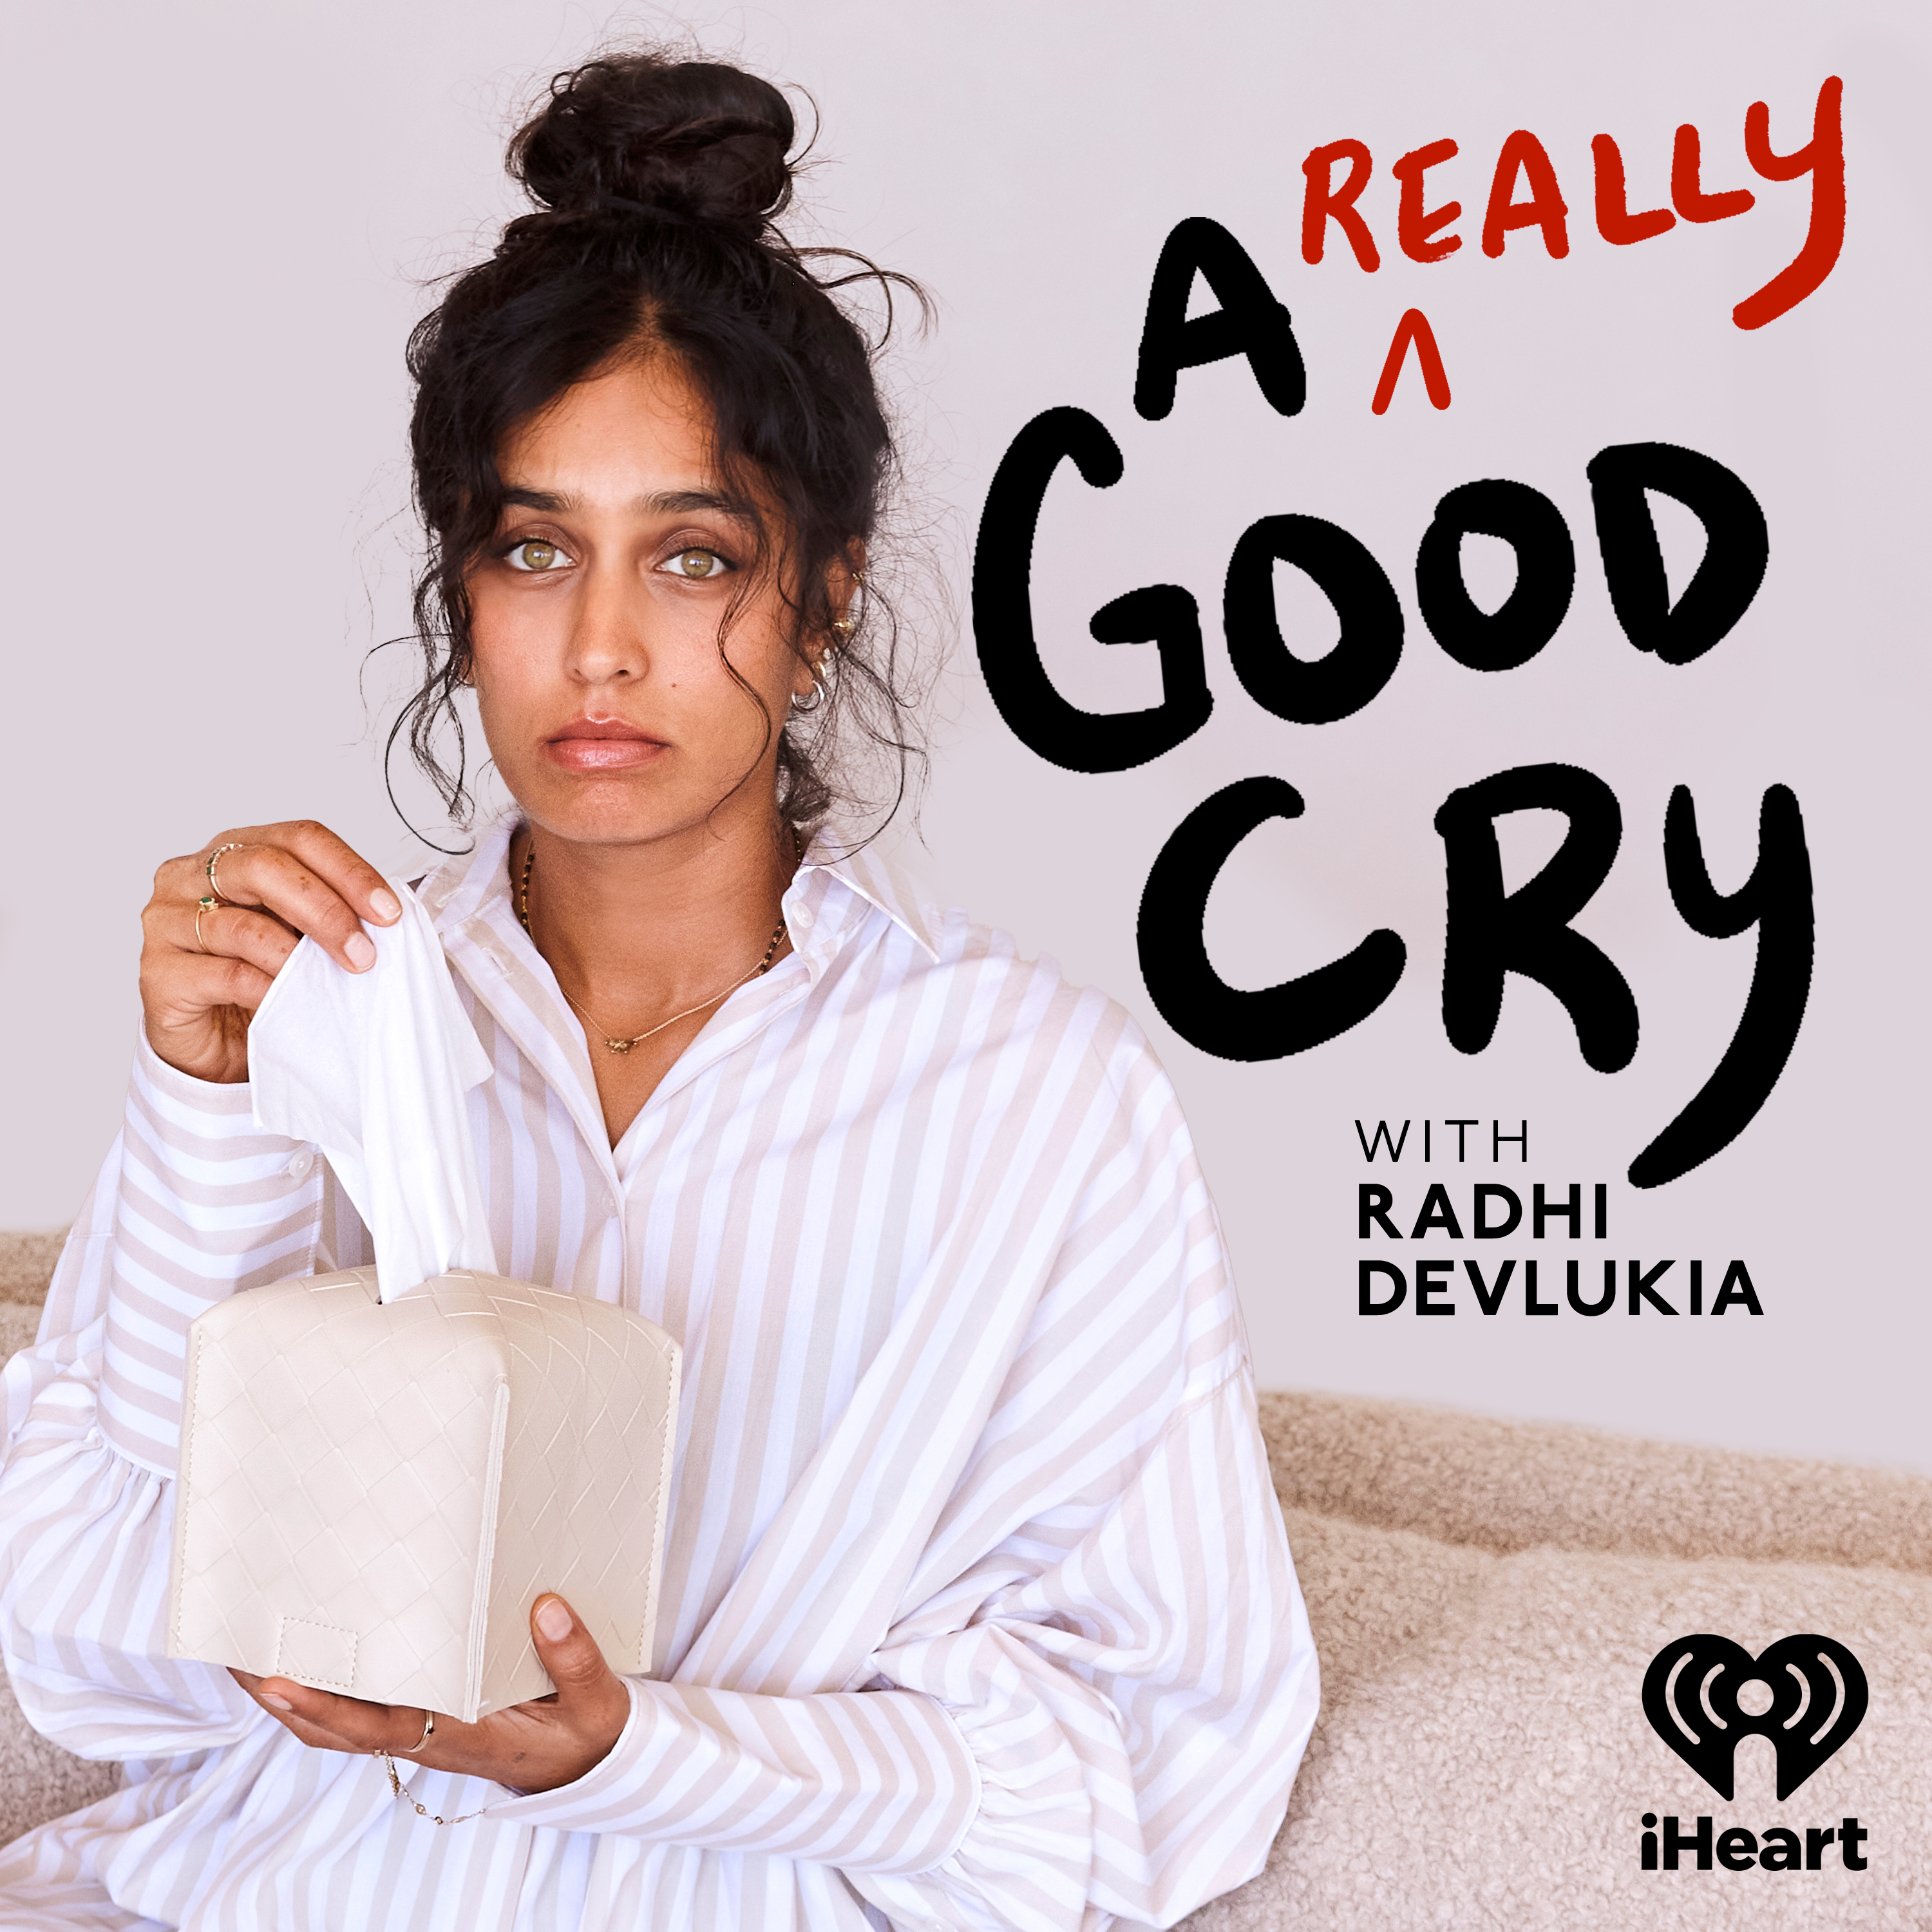 Introducing: A Really Good Cry with Radhi Devlukia